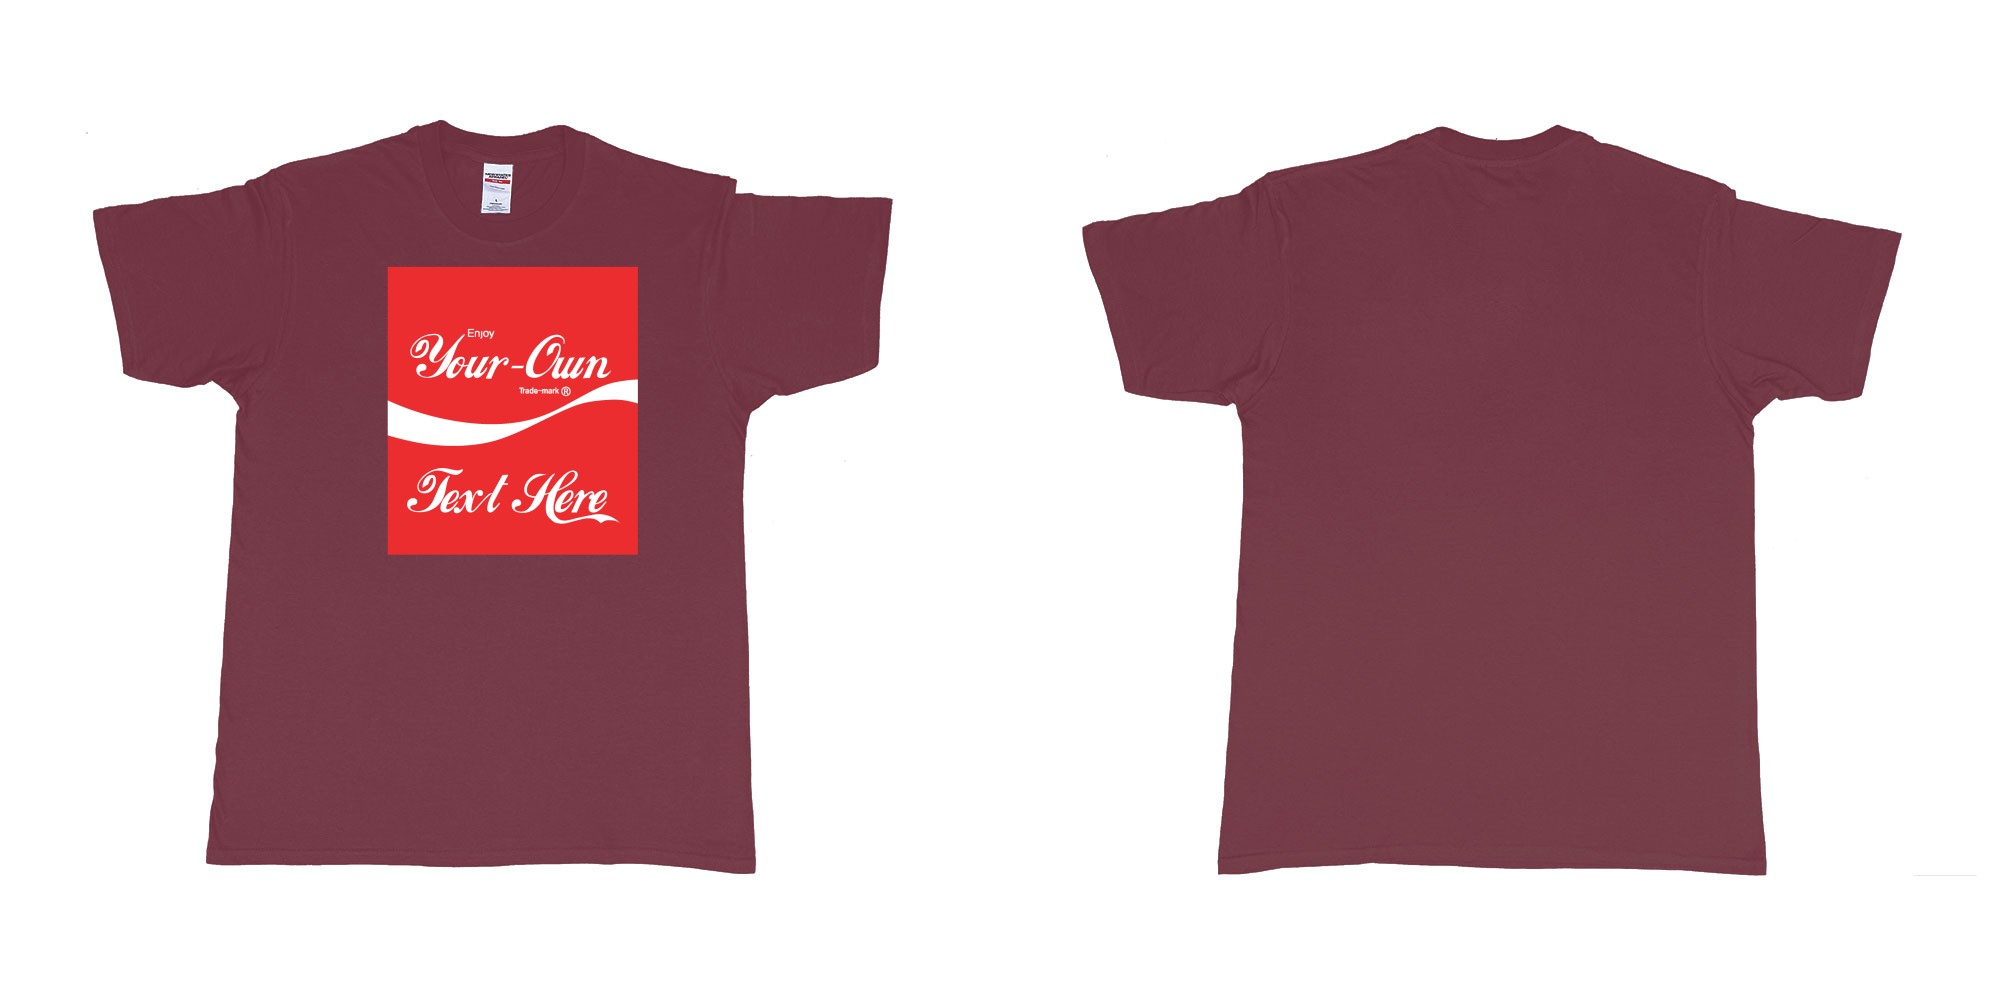 Custom tshirt design Coca Cola in fabric color marron choice your own text made in Bali by The Pirate Way